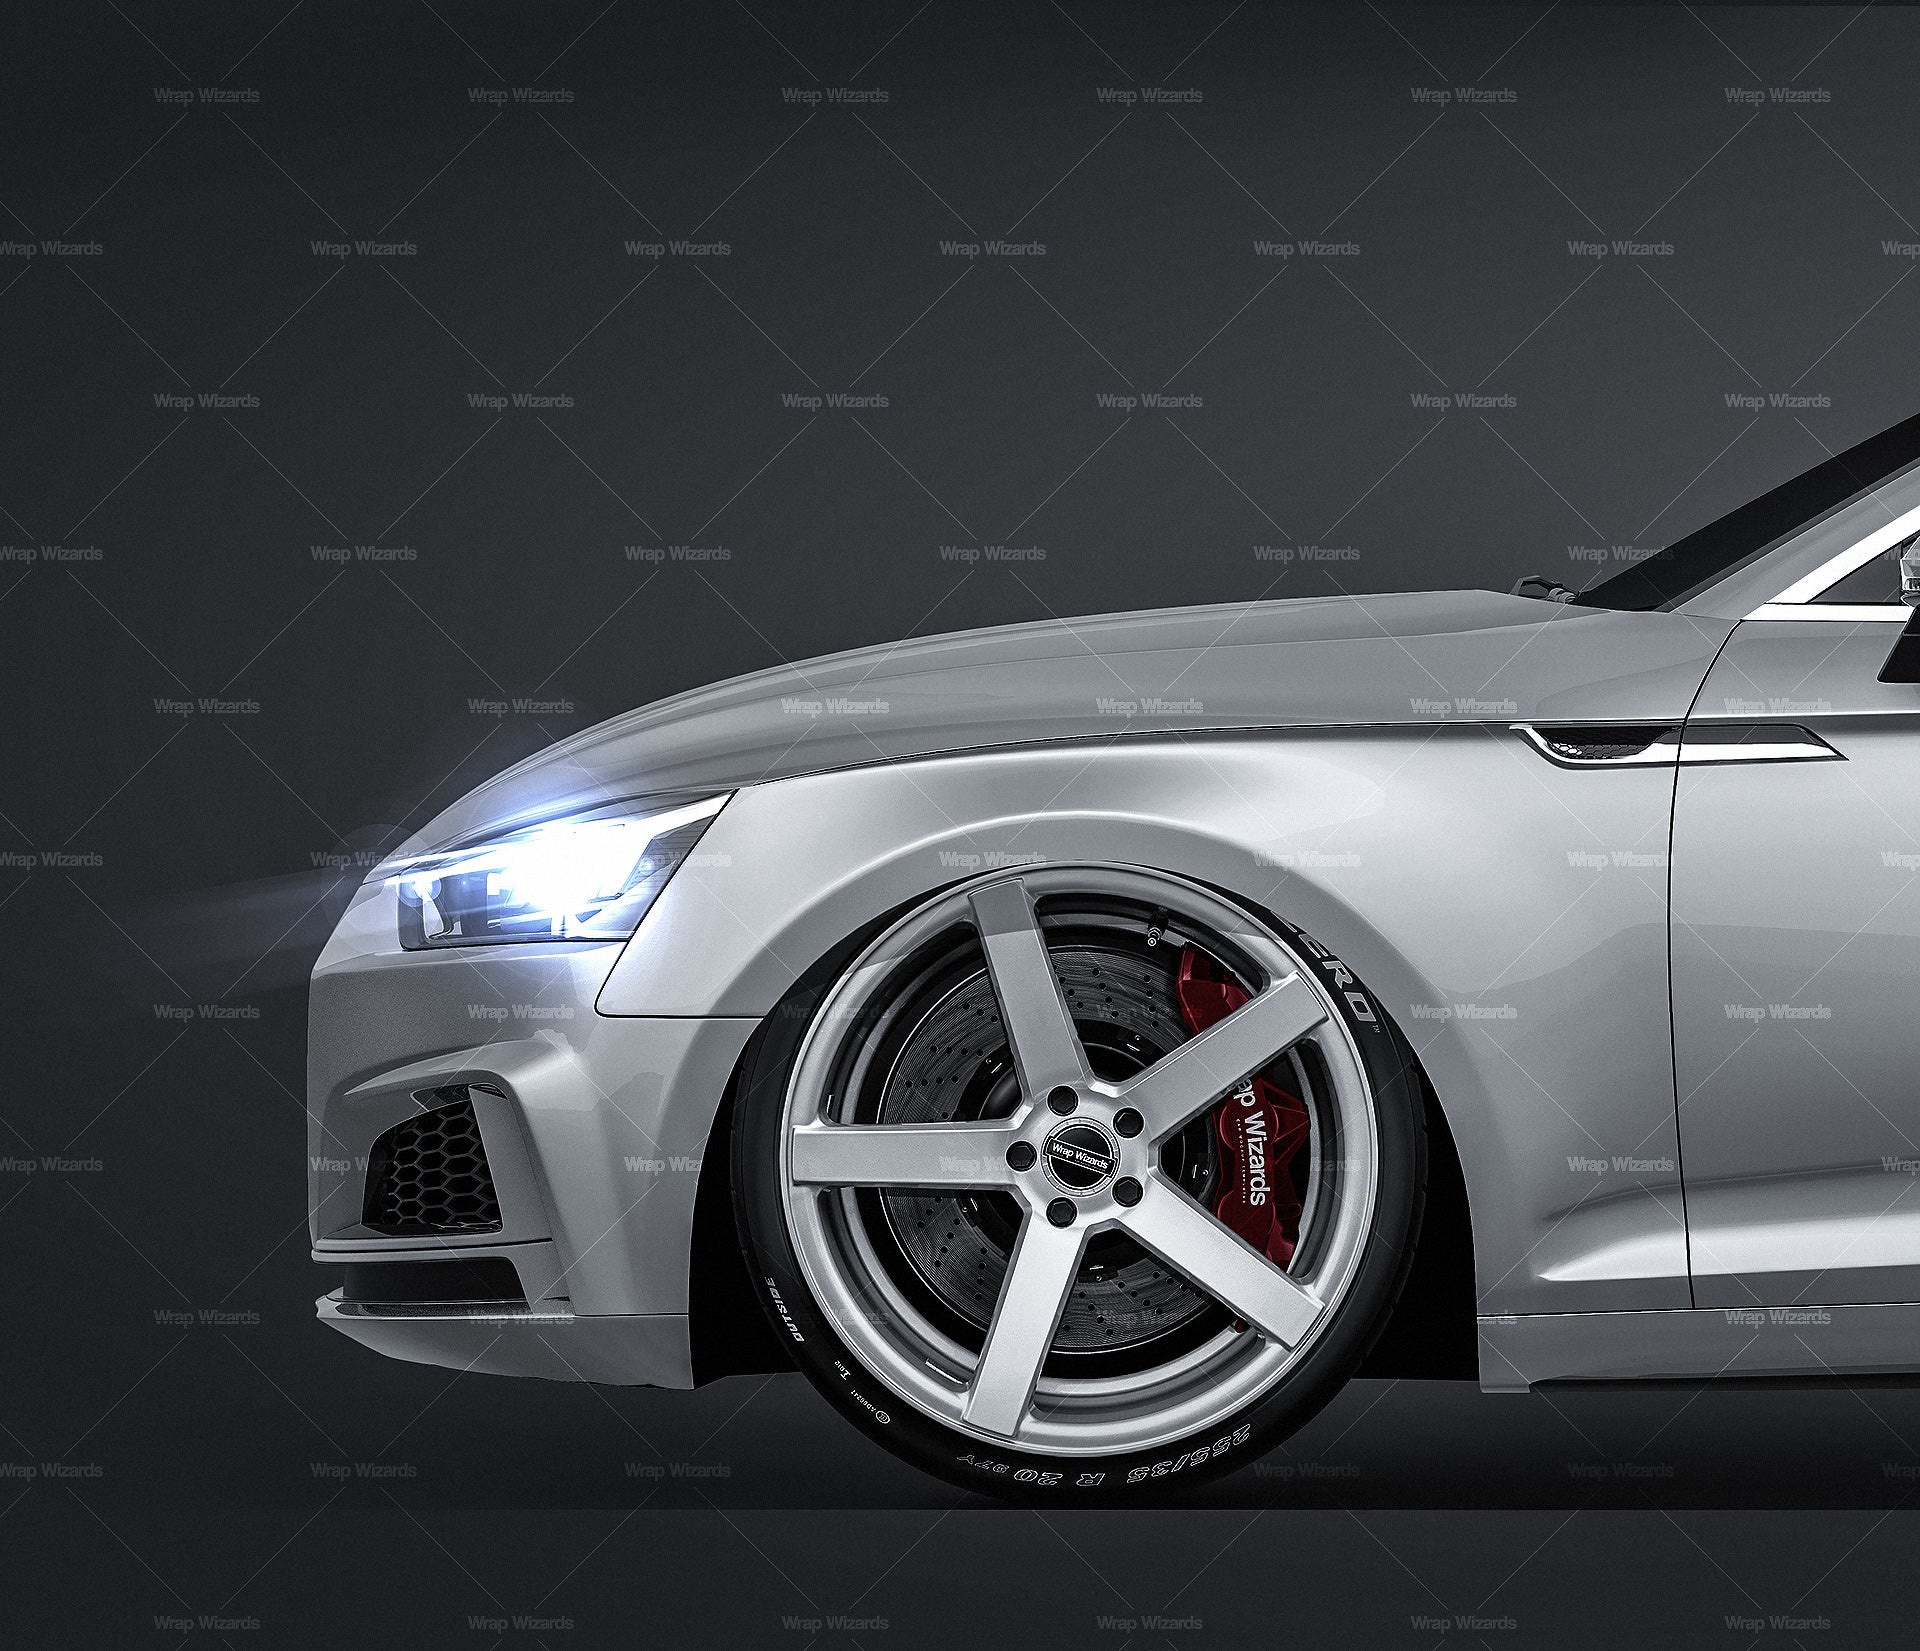 Audi S5 Coupe 2017 glossy finish - all sides Car Mockup Template.psd